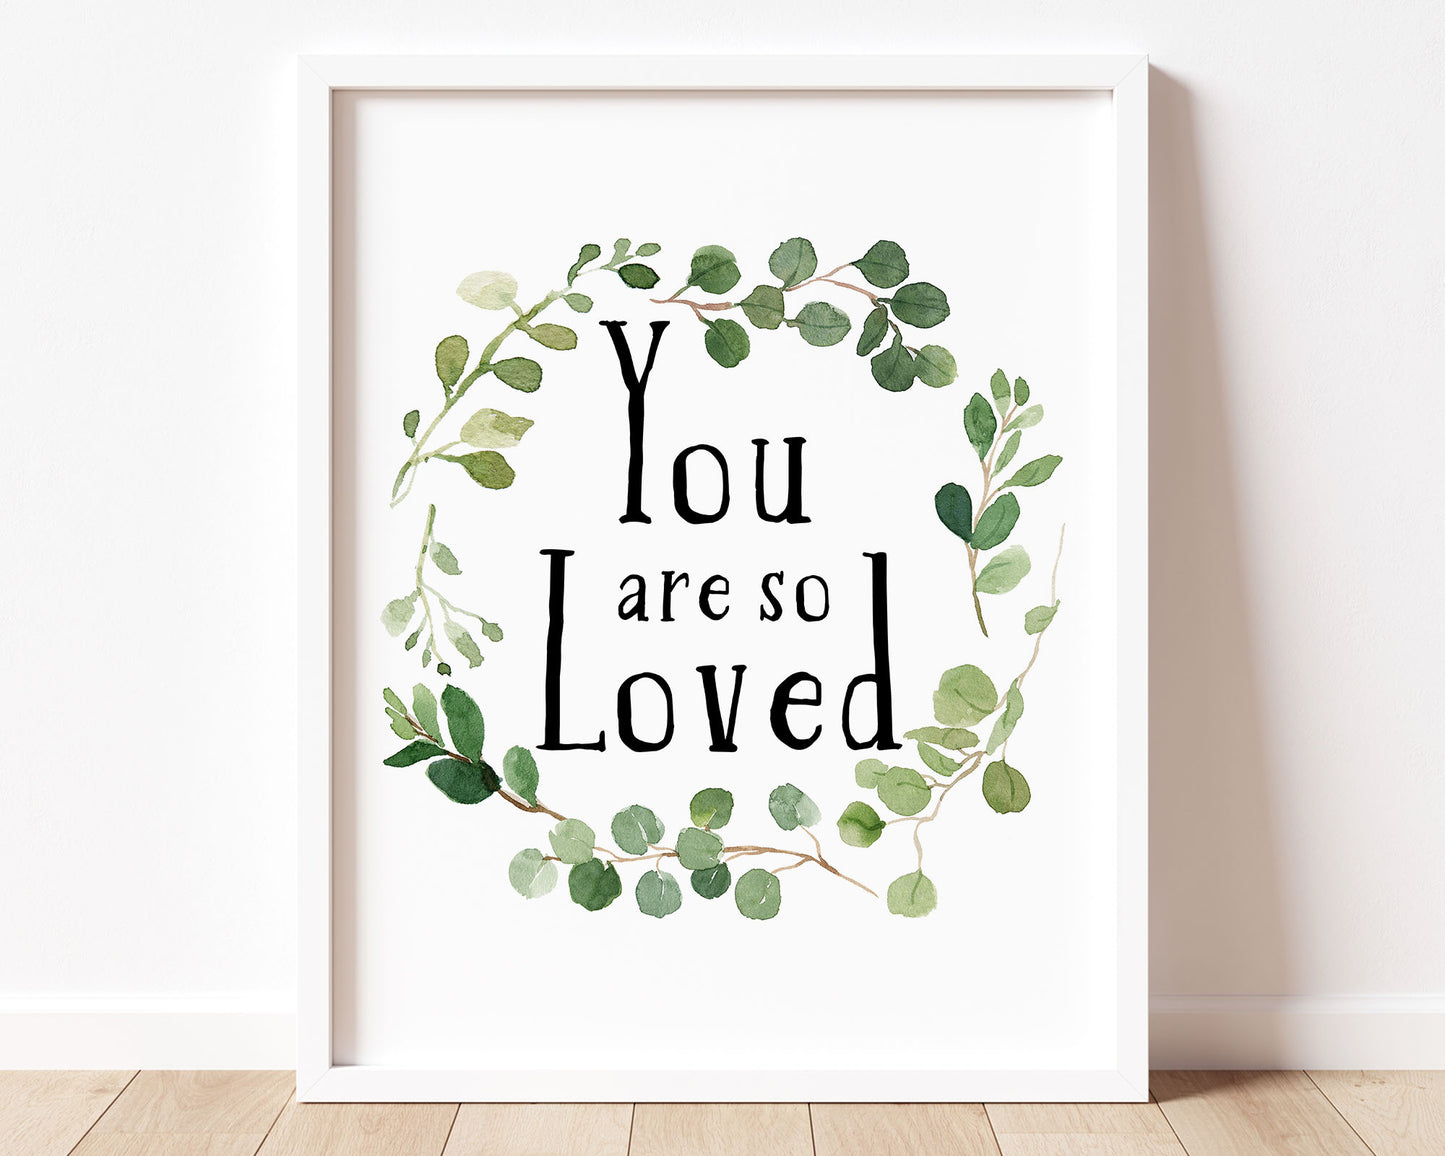 Watercolor Eucalyptus Greenery Wreath You Are So Loved Printable Wall Art. Great for Baby Boy or Baby Girl Nursery Decor or Kids Room Wall Hangings.